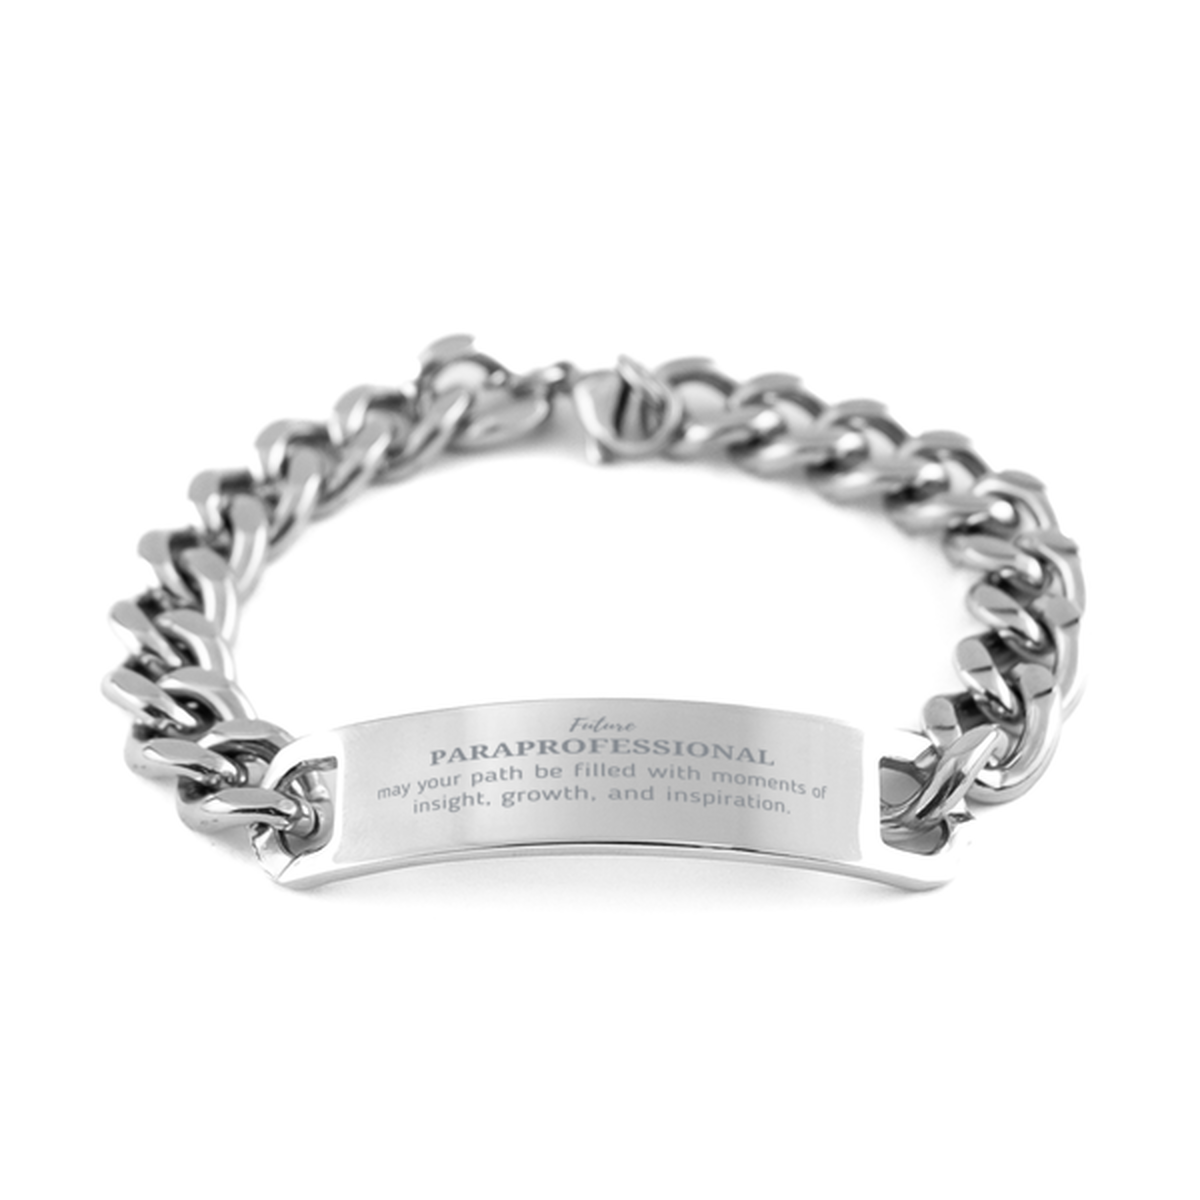 Future Paraprofessional Gifts, May your path be filled with moments of insight, Graduation Gifts for New Paraprofessional, Christmas Unique Cuban Chain Stainless Steel Bracelet For Men, Women, Friends